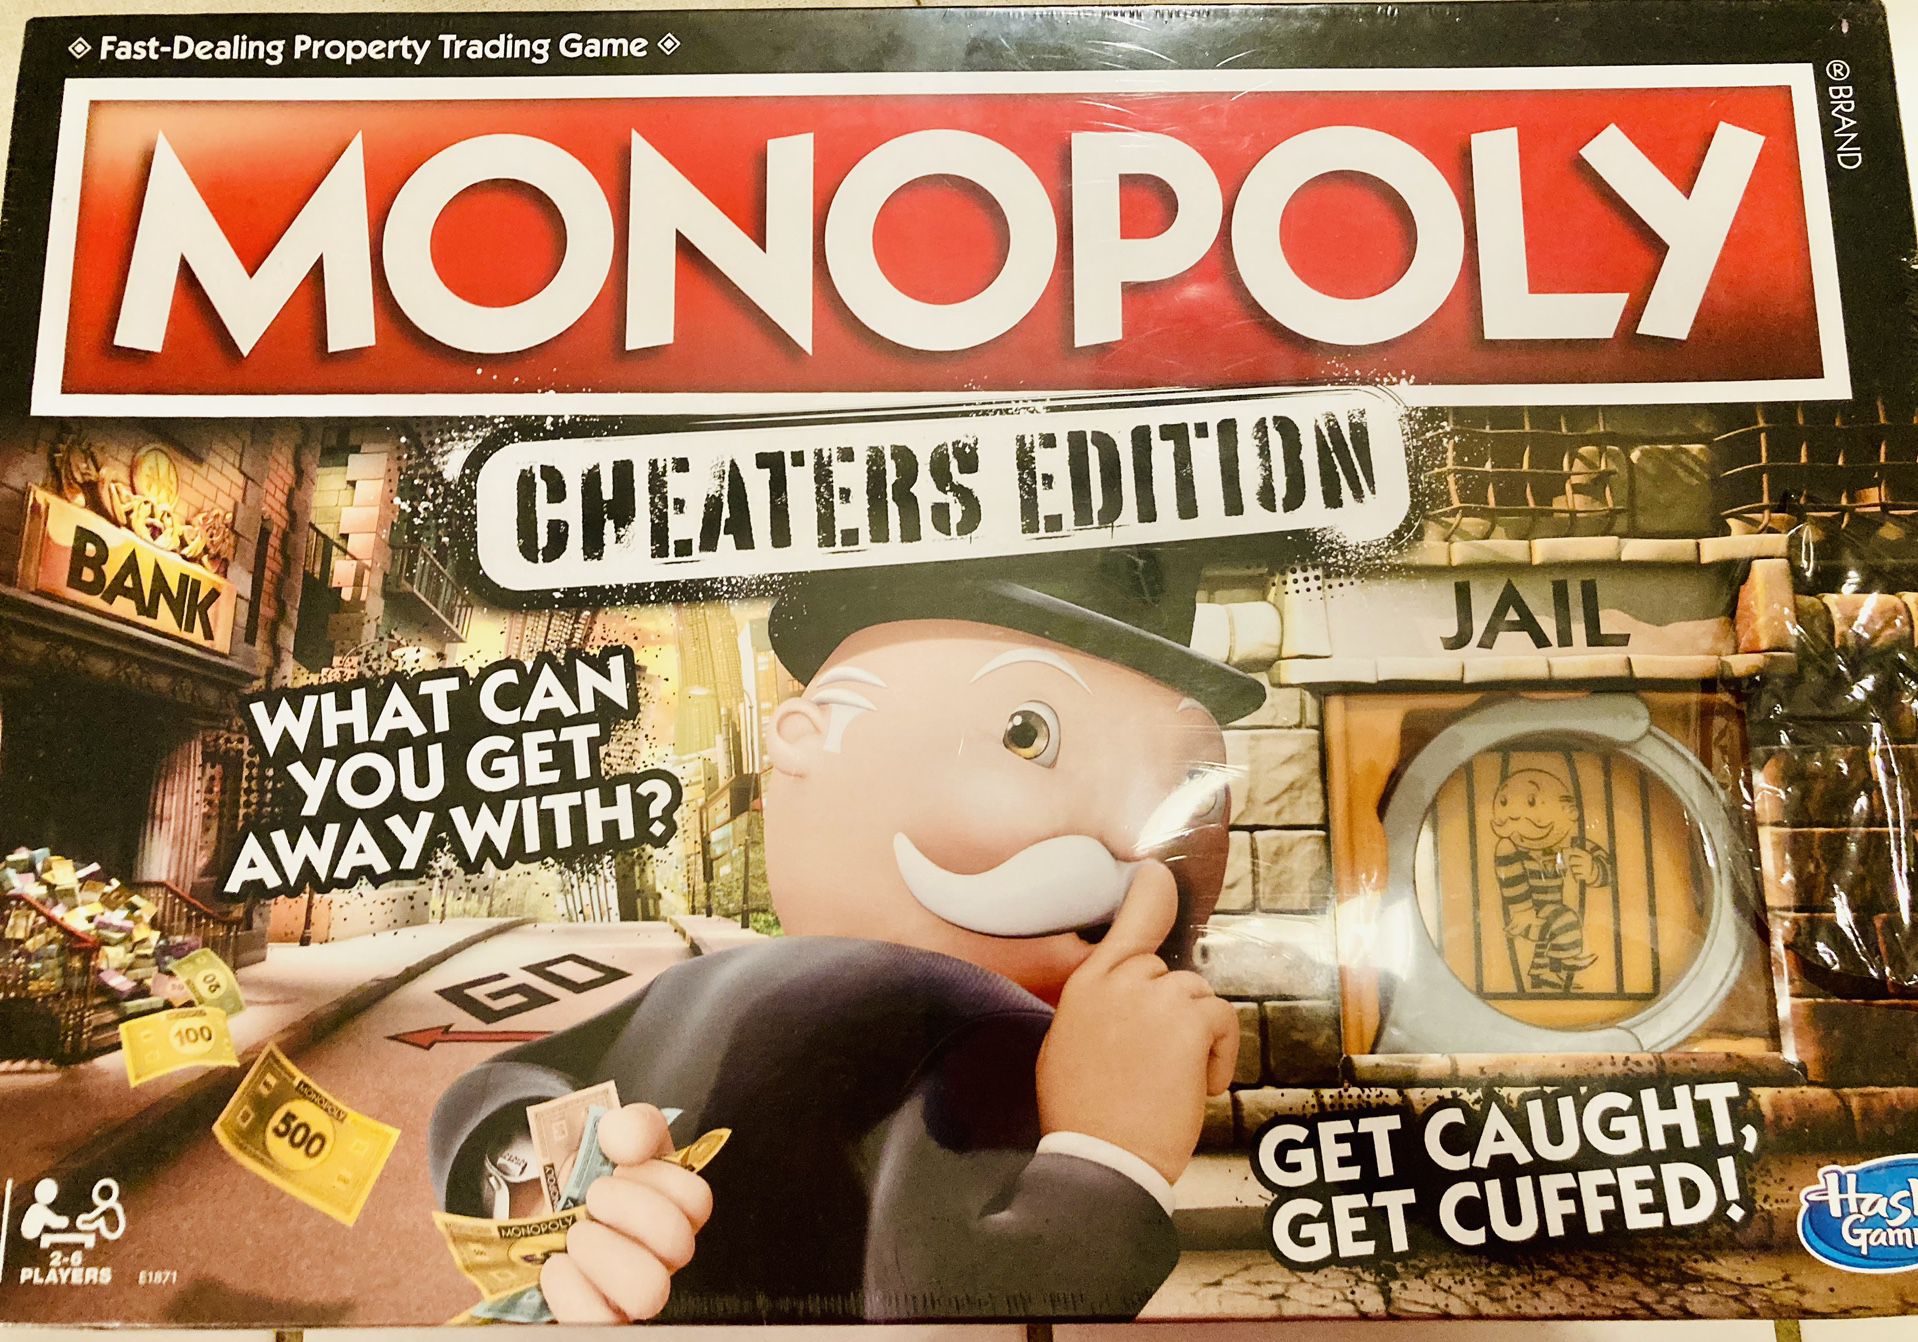 BRAND NEW - Monopoly Cheater’s Edition board game 